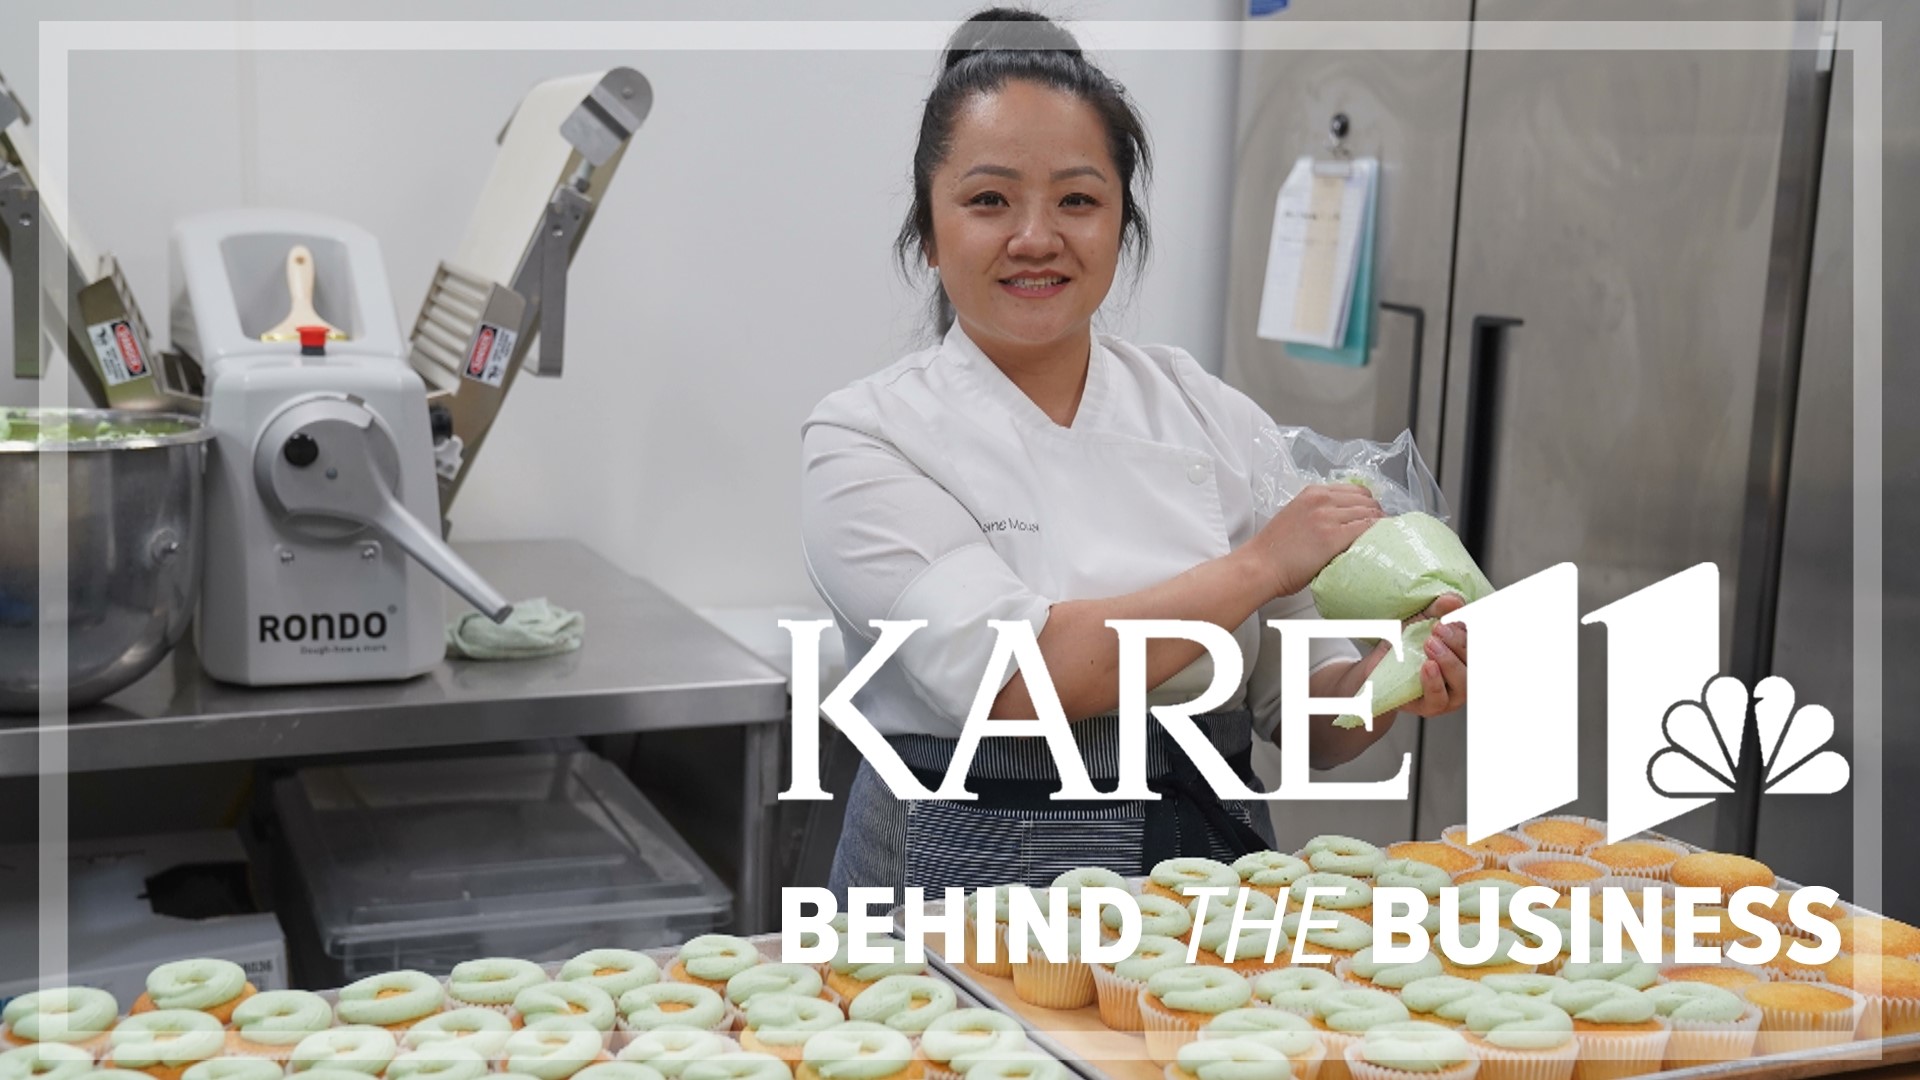 From a Mother's Day popup to planning a new restaurant this year, the pastry chef is busier than ever.